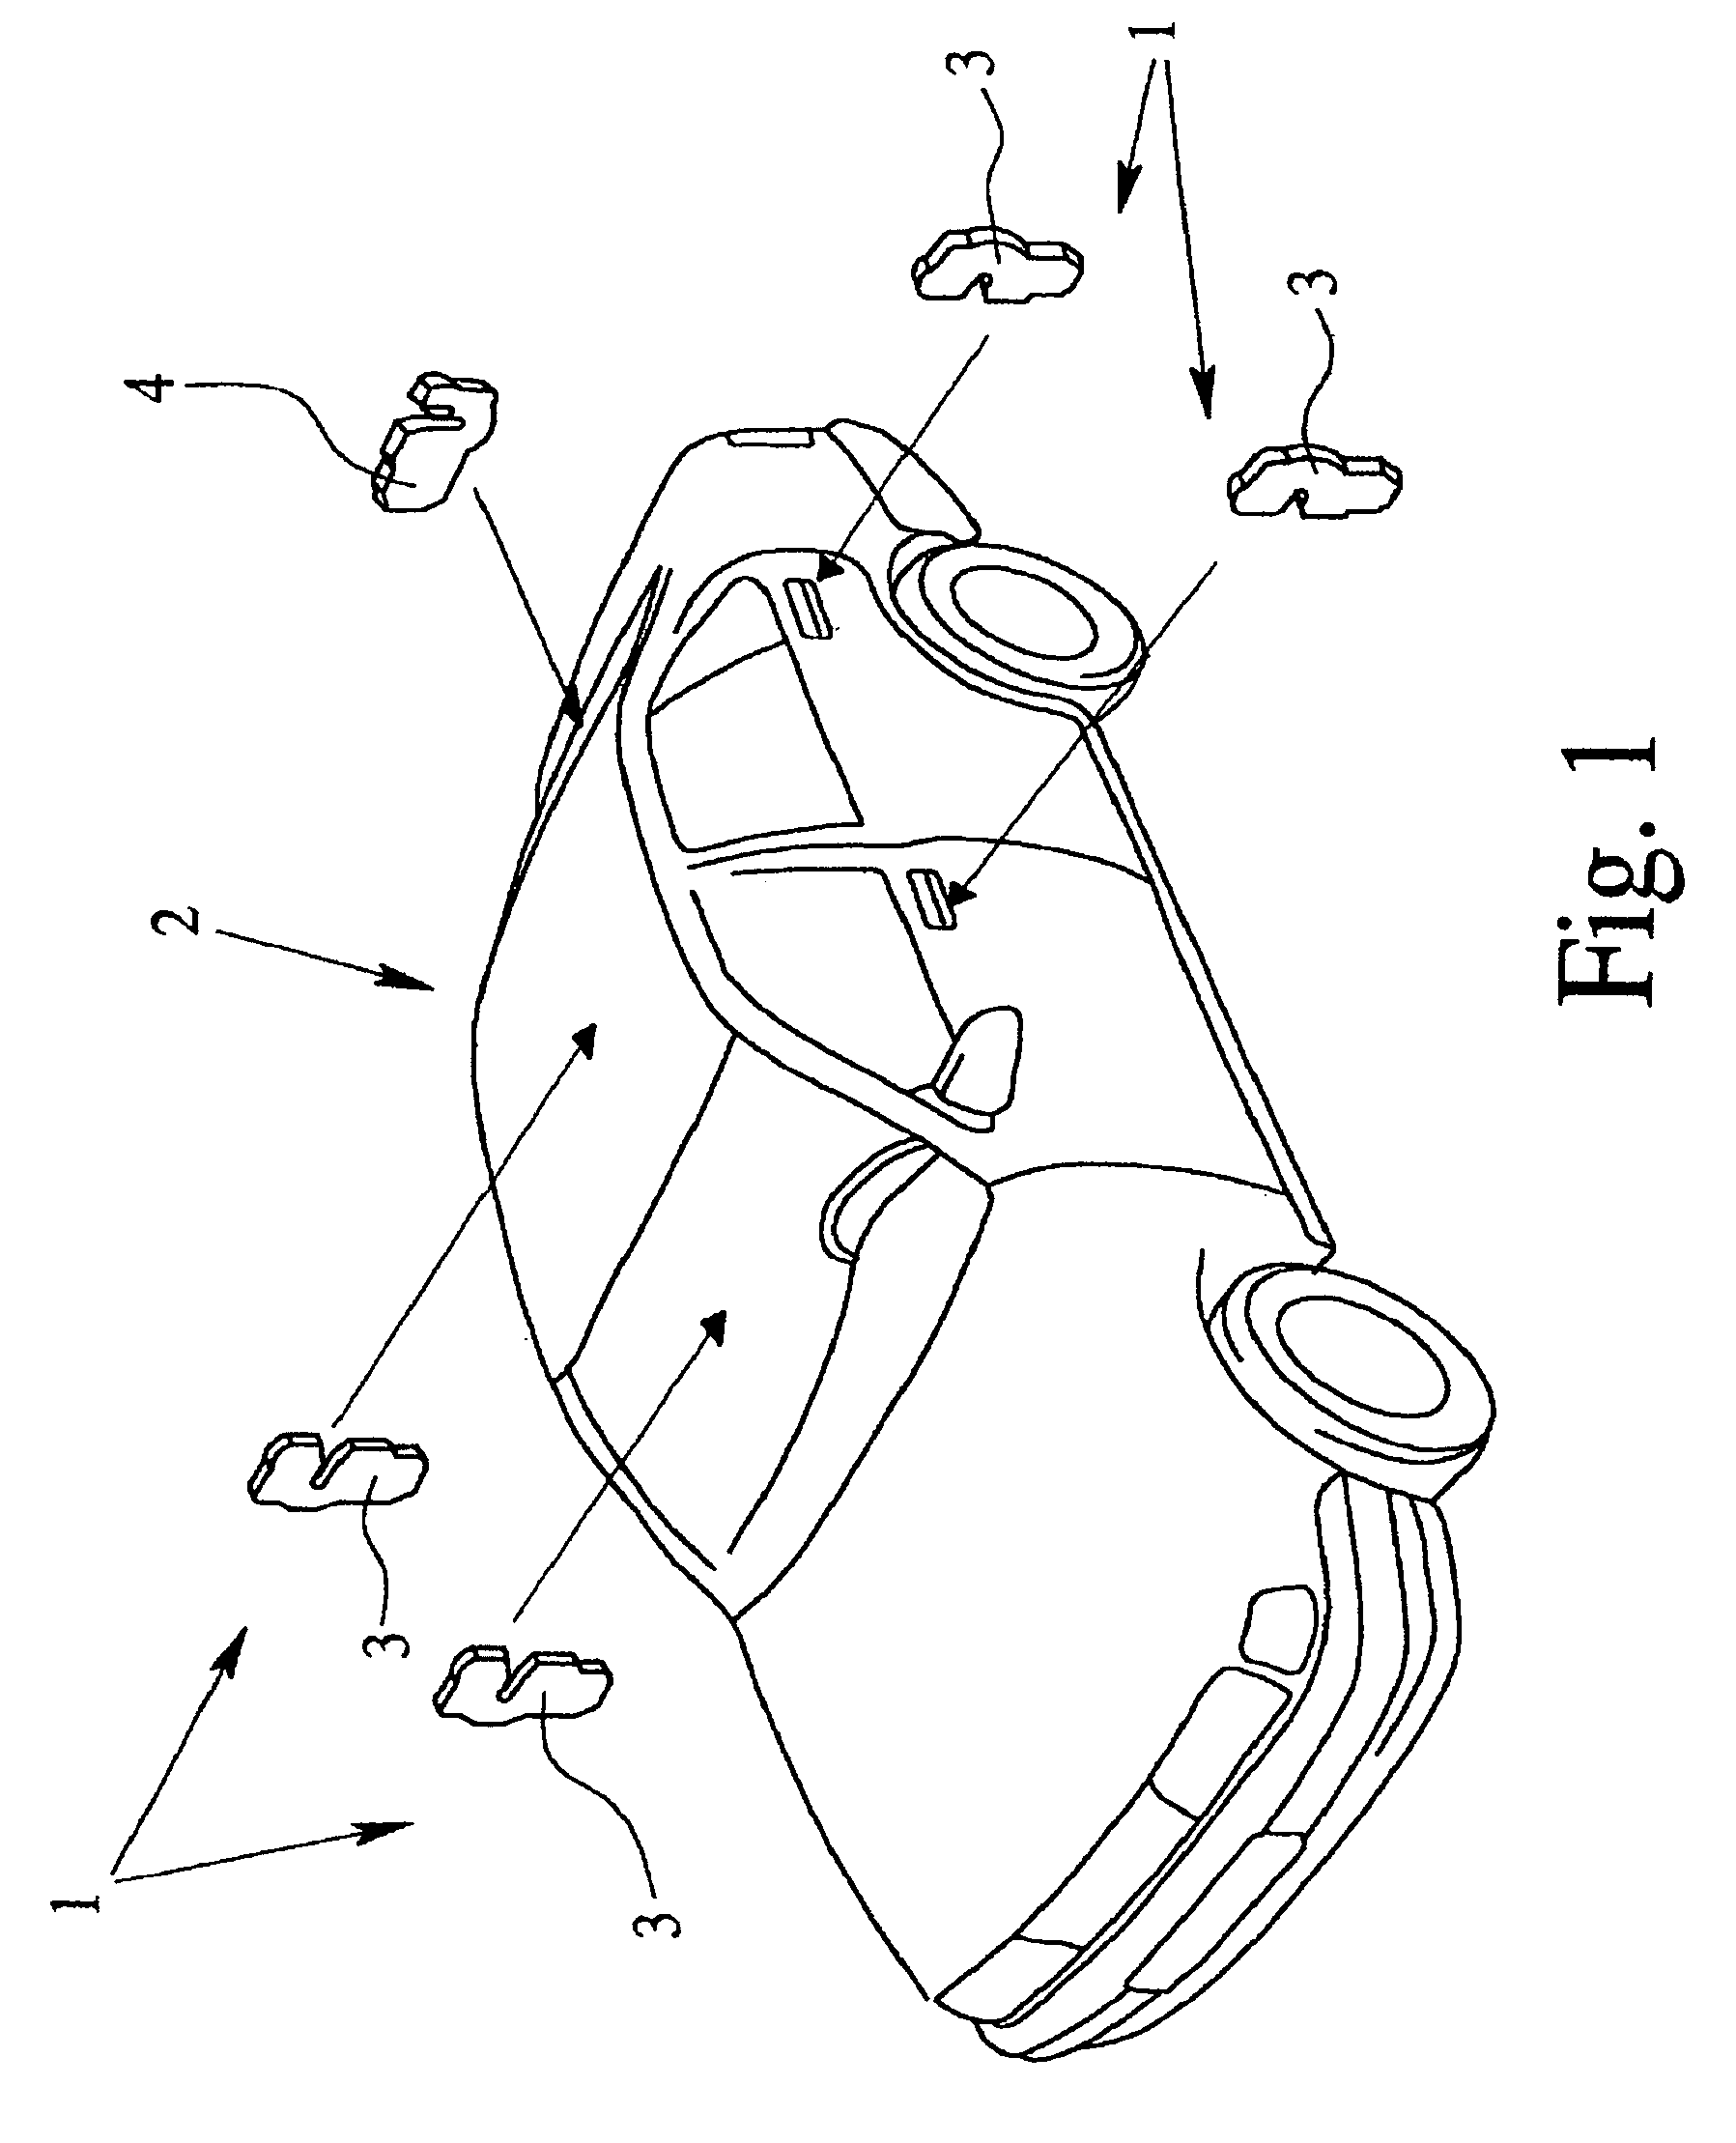 Electrical component of a motor vehicle